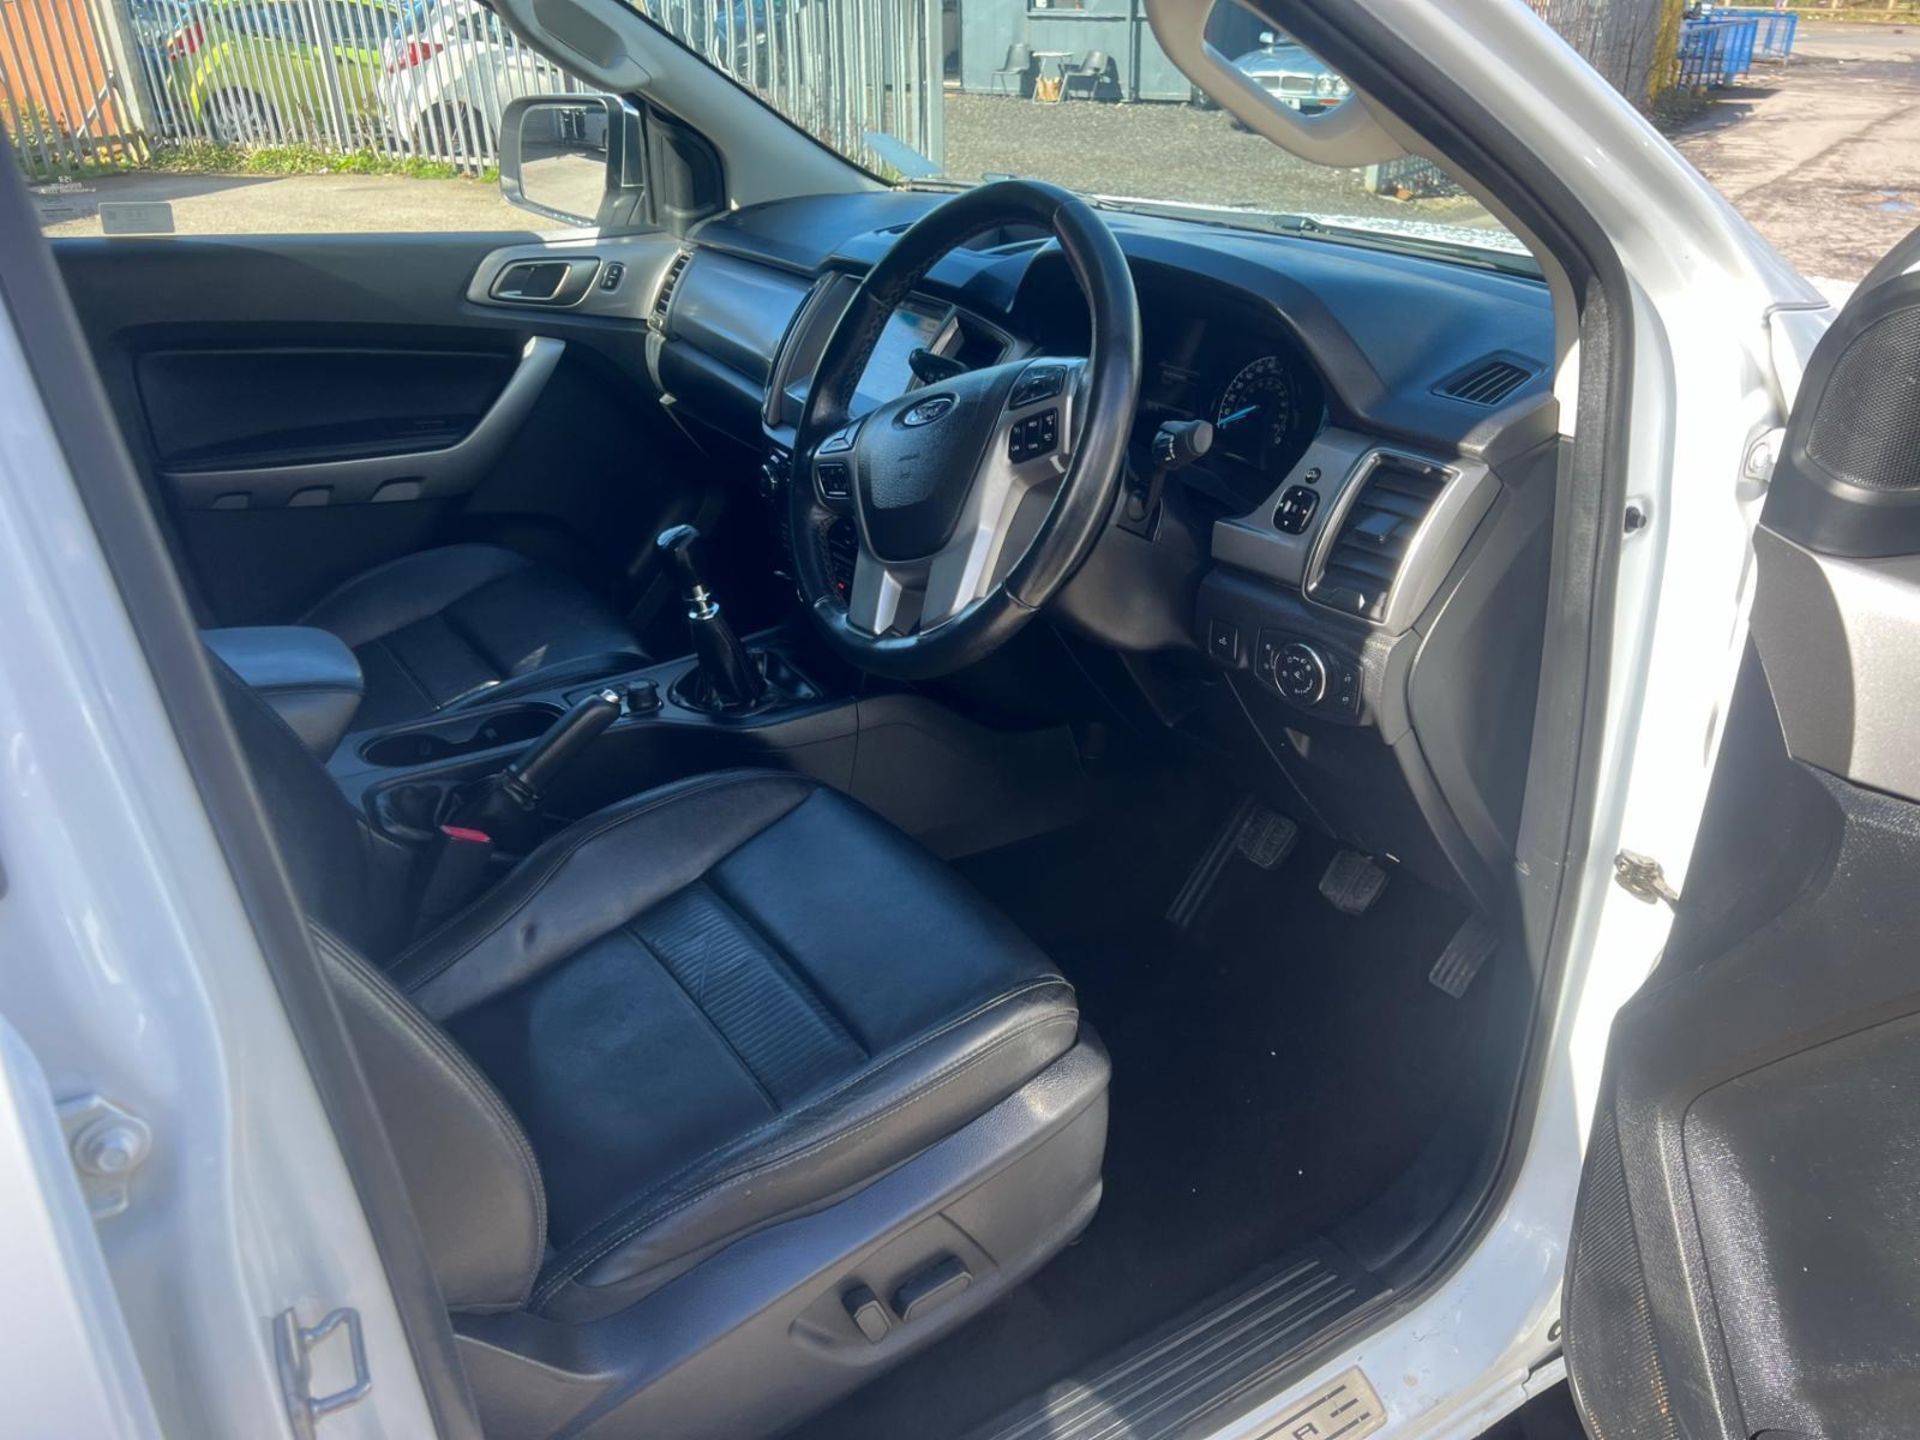 2020 FORD RANGER DOUBLE CAB LIMITED (ONLY 60 K MILES) - Image 9 of 14